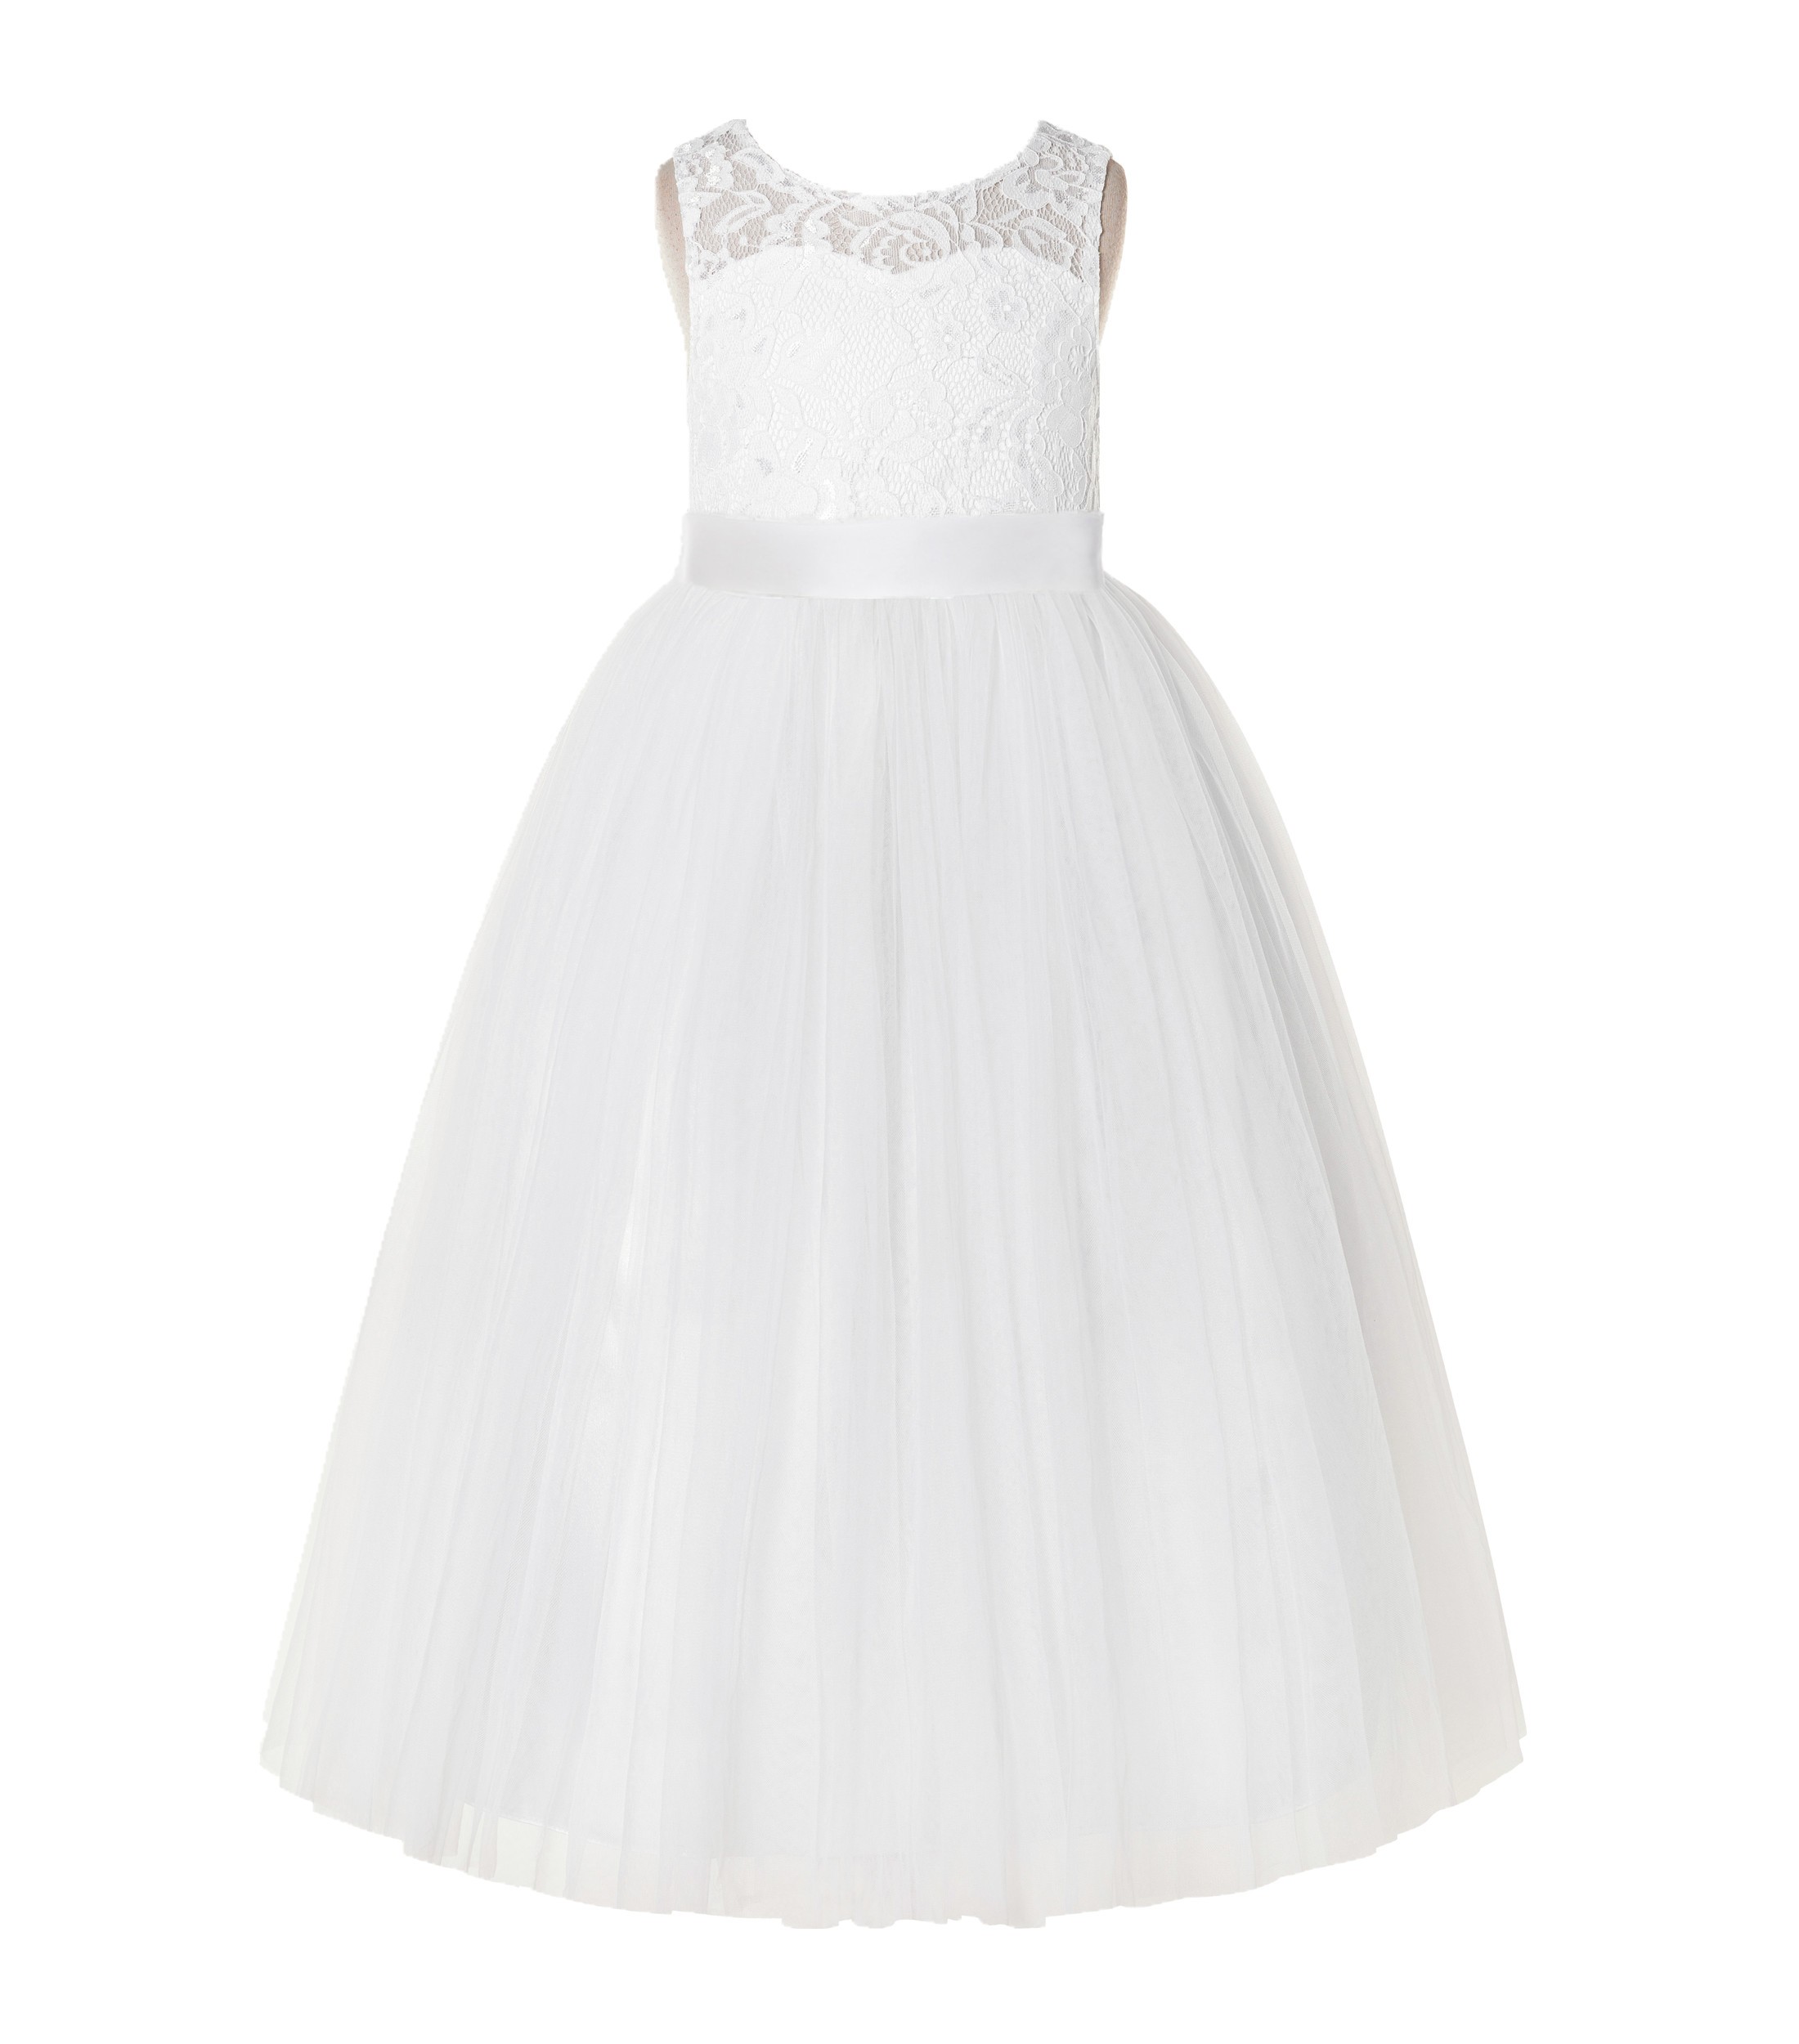 Ivory Tulle Lace A-Line Flower Girl Dress 178